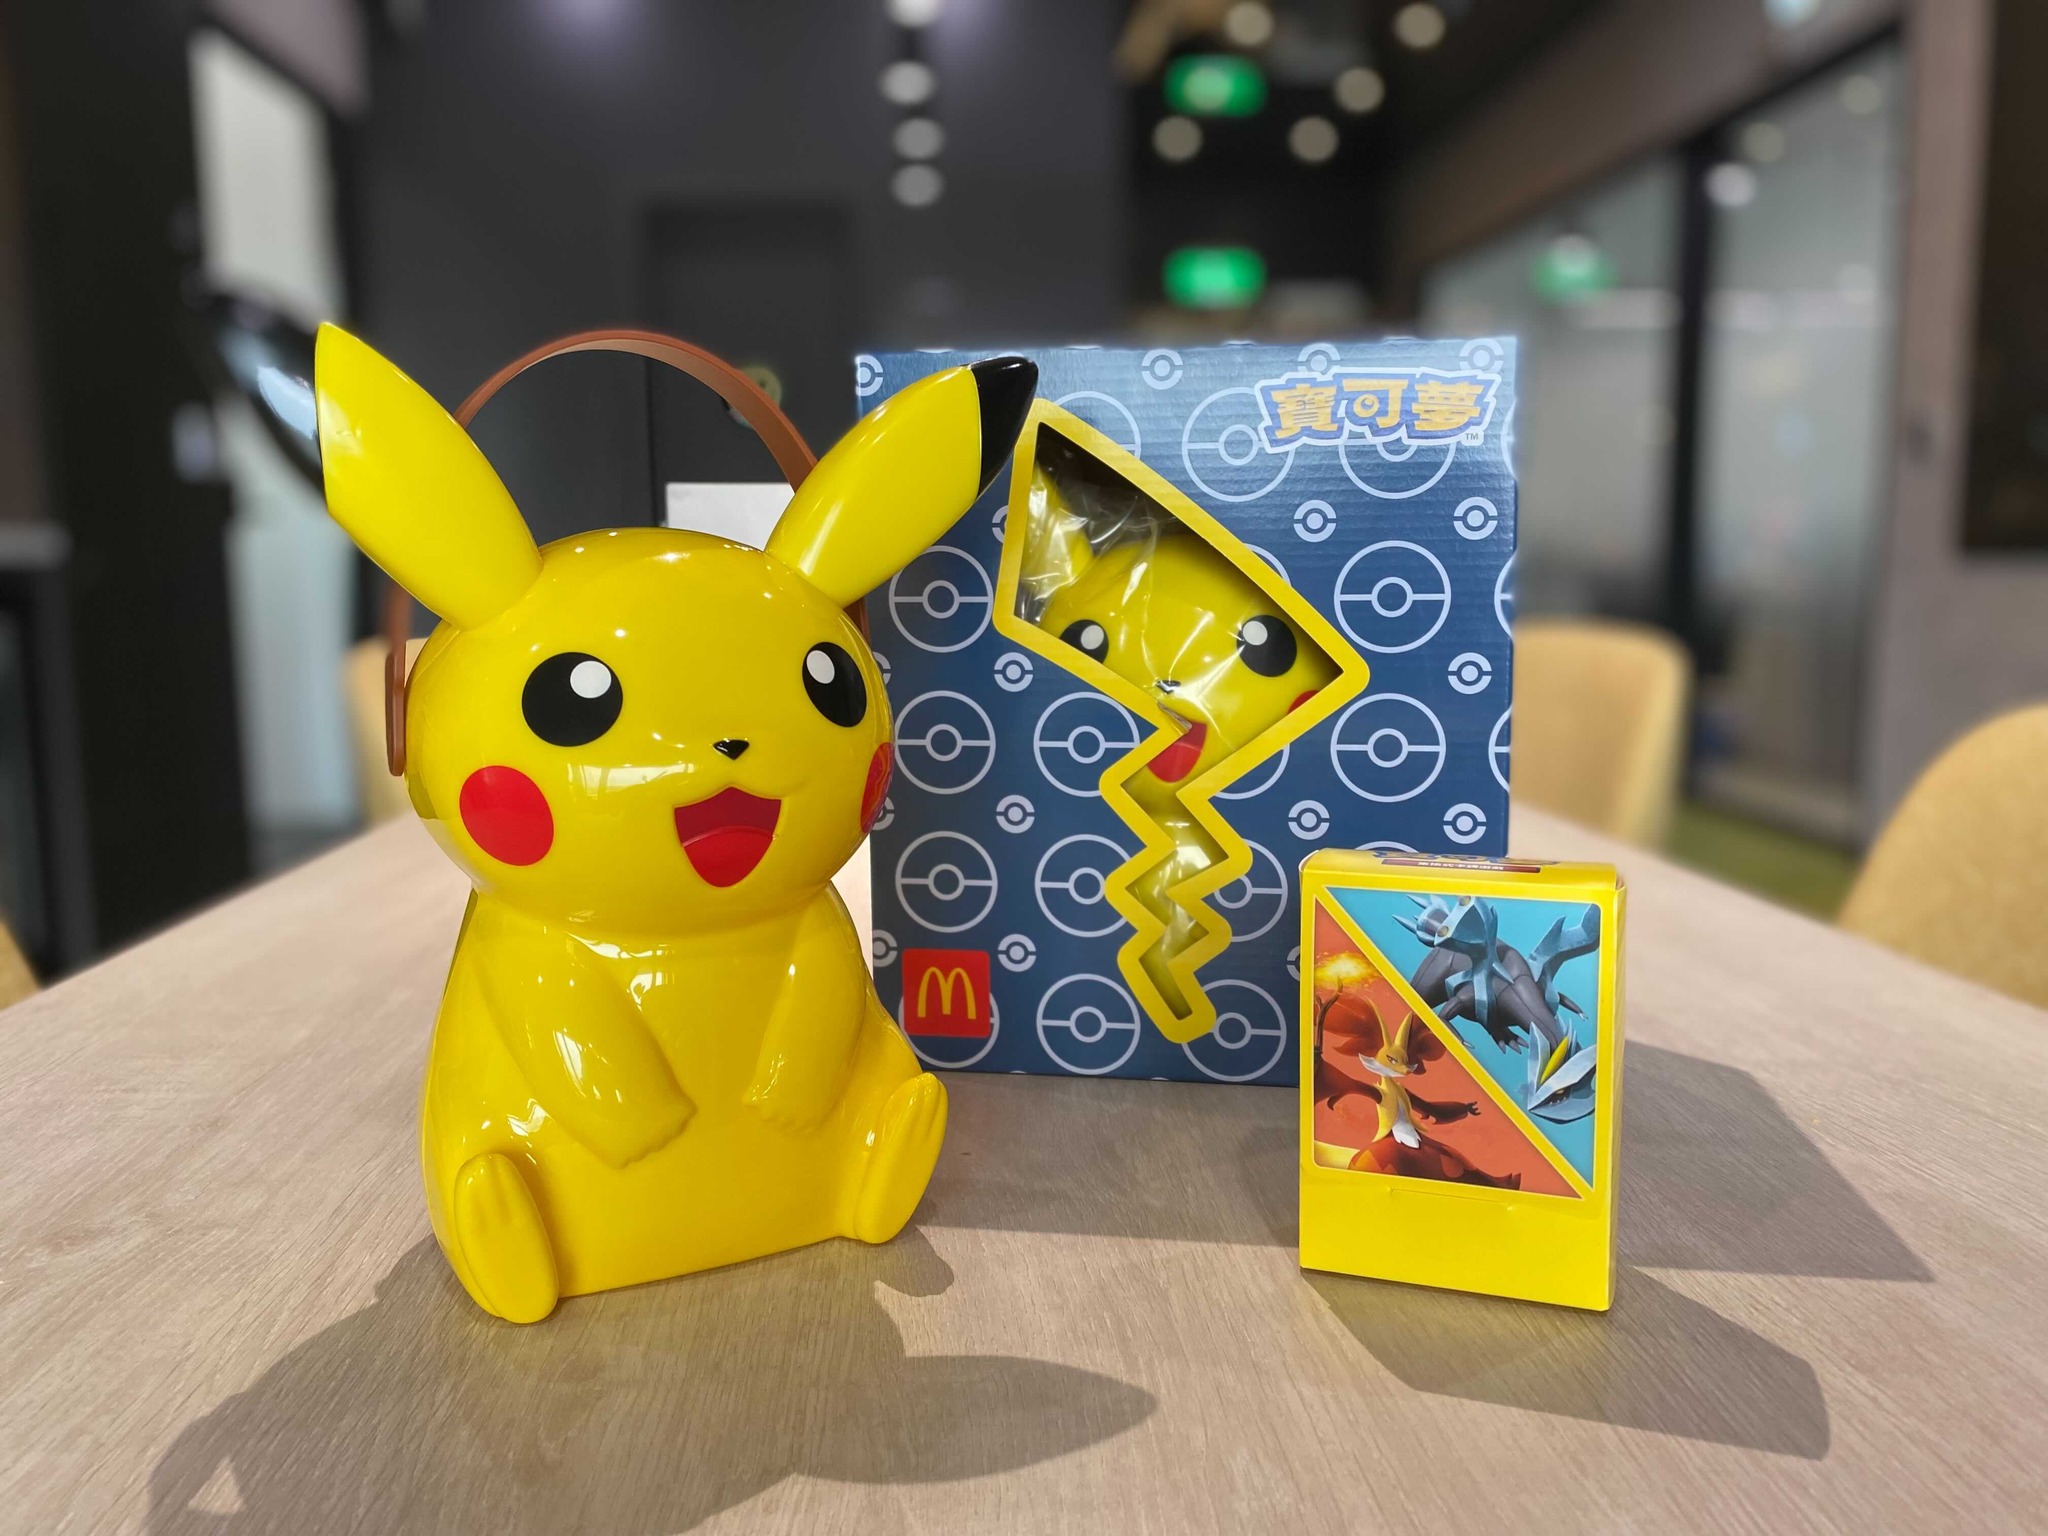 McDonald’s Pikachu Carrier Available On 8 Sep, Long Queues In The